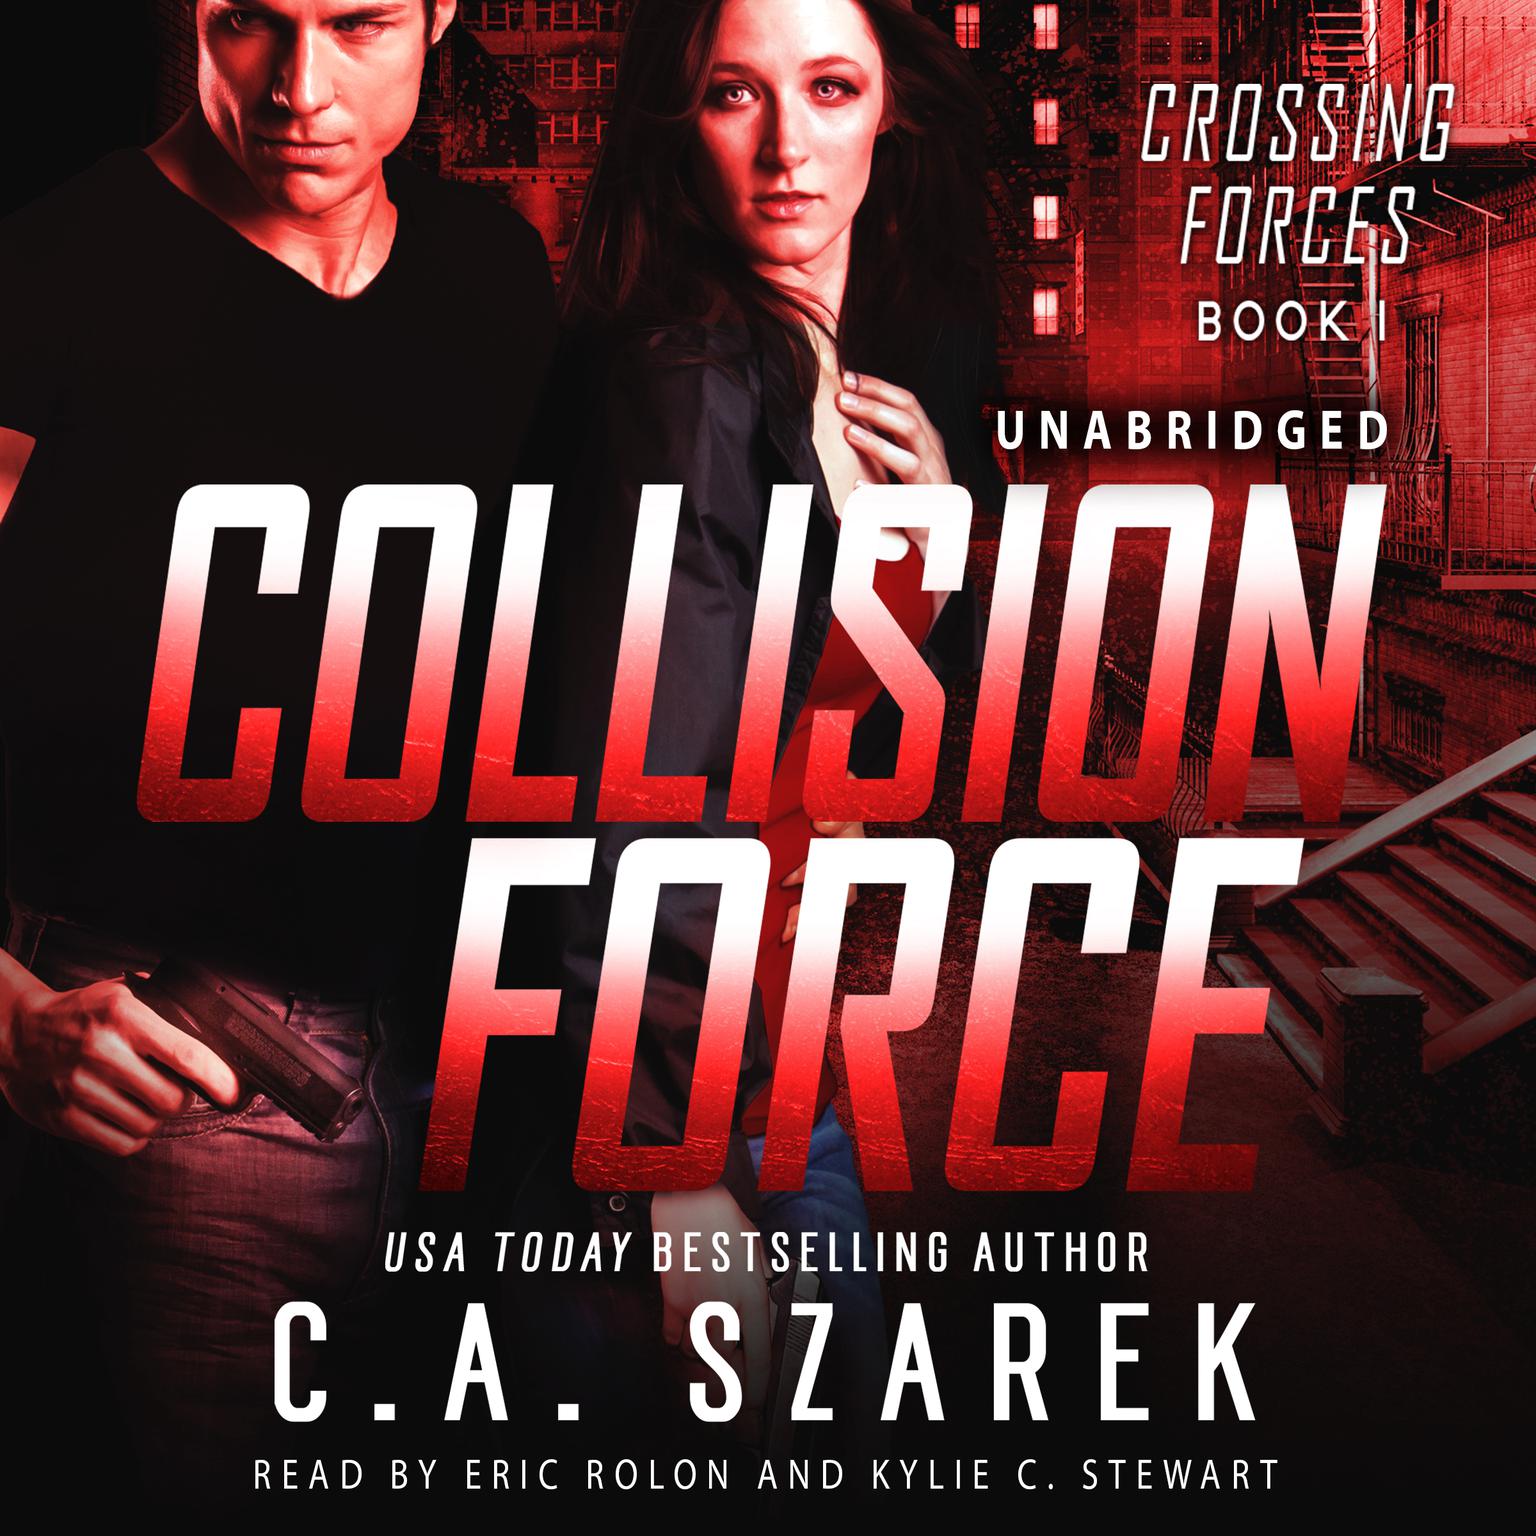 Collision Force (Crossing Forces Book One) Audiobook, by C.A. Szarek